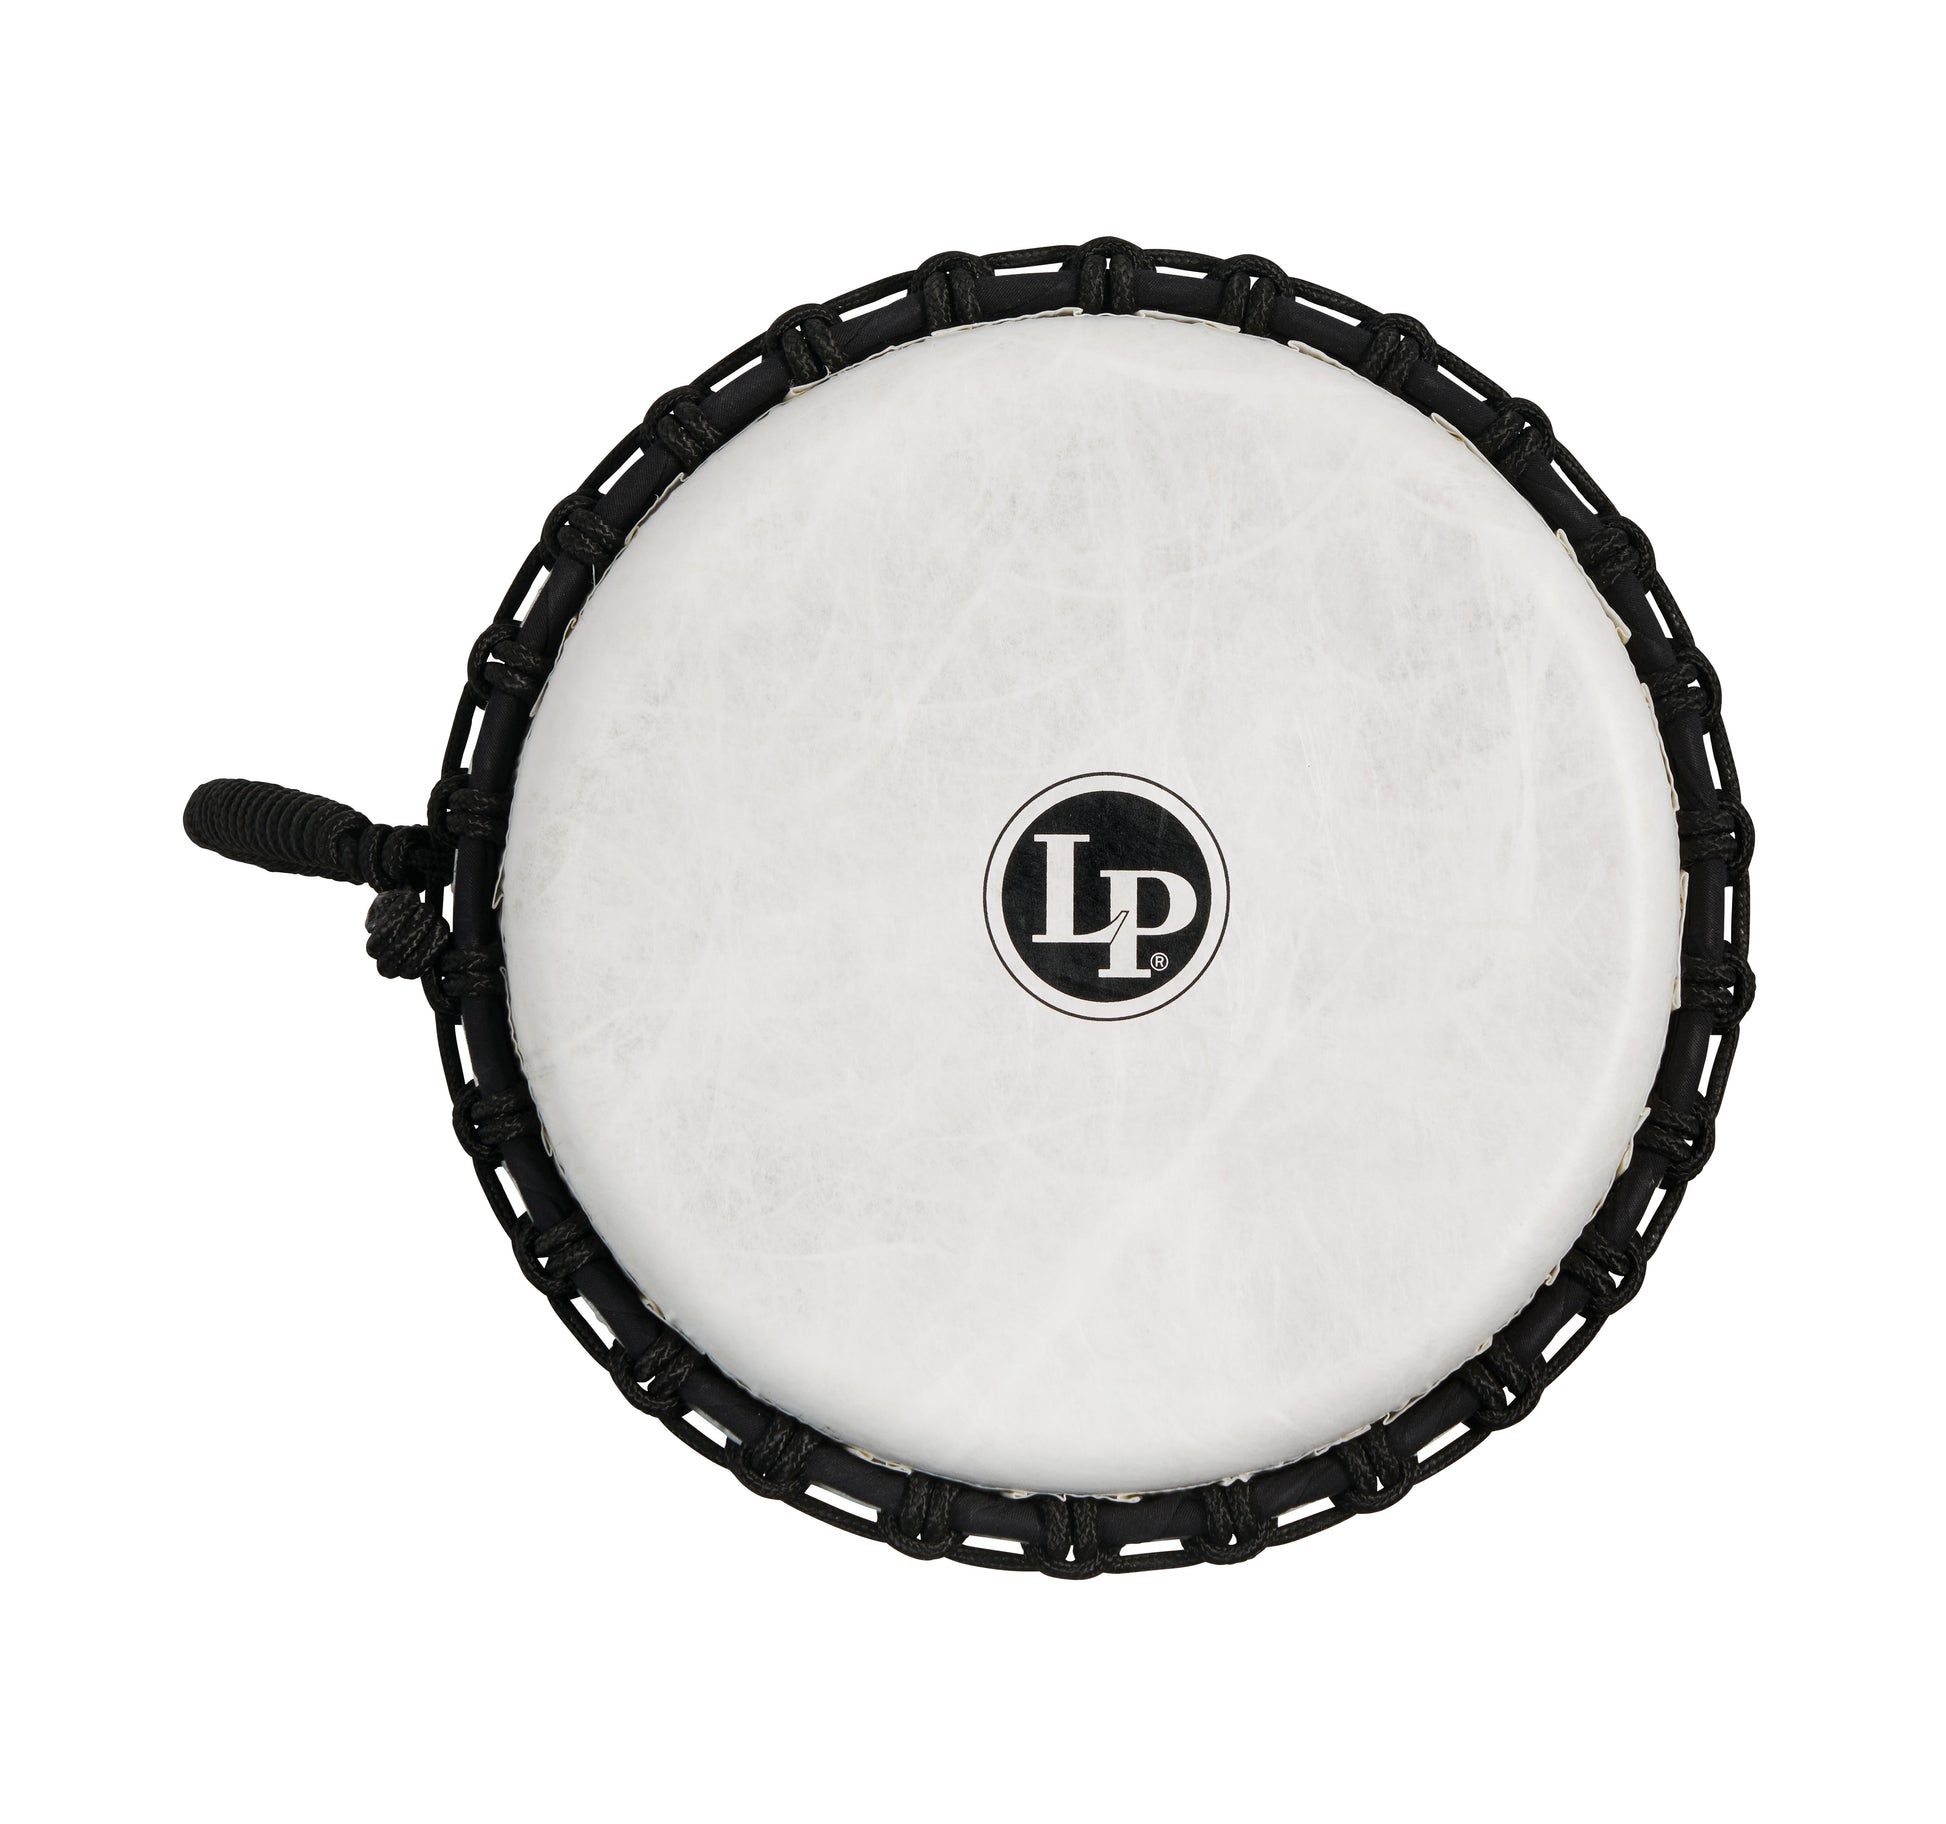 Latin Percussion 10-inch Rope Tuned Circle Djembe with Perfect-Pitch head - Black - LP2010-BK - Poppa's Music 